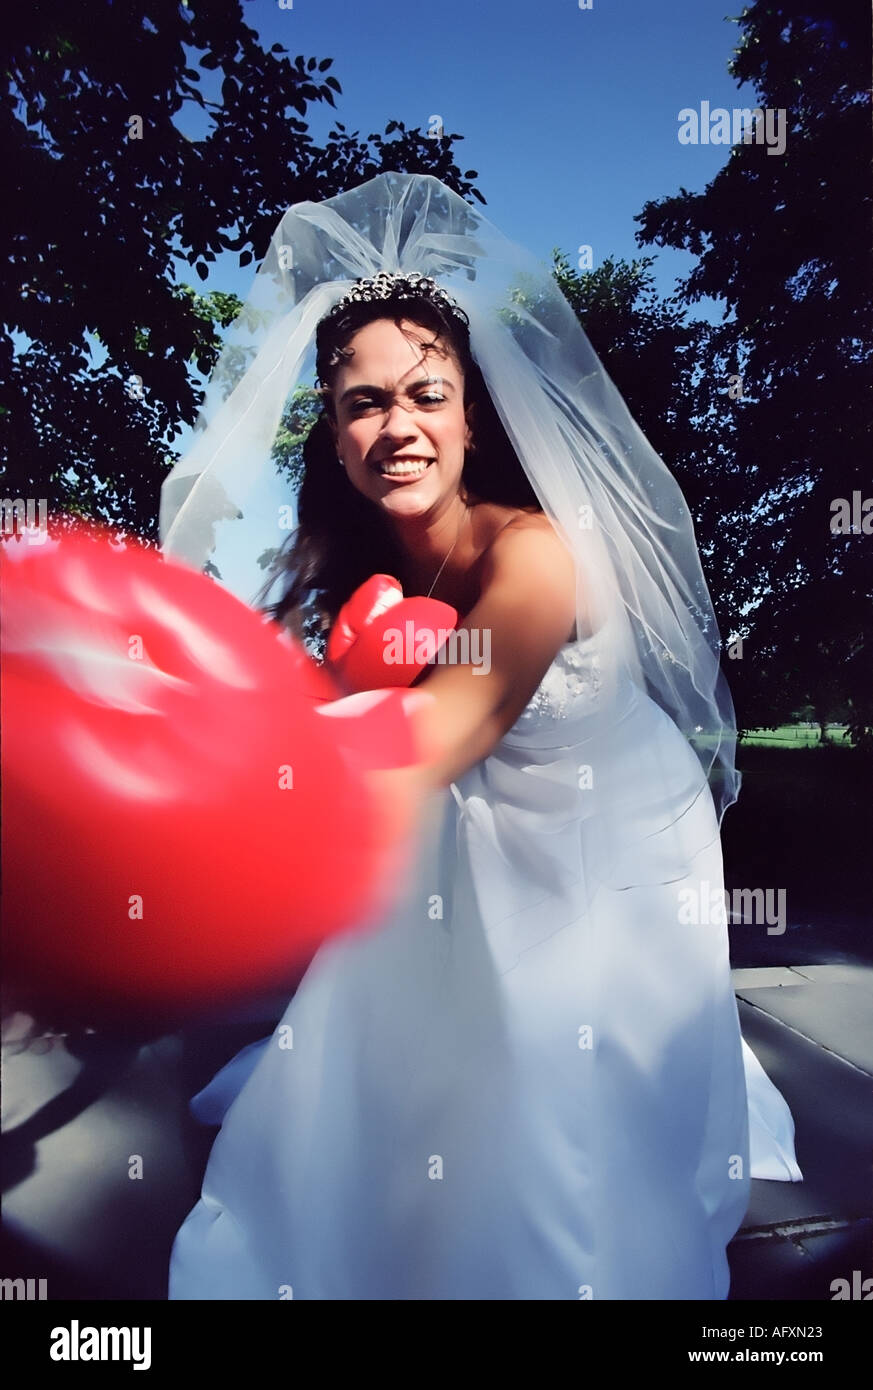 Bride takes a swing wearing boxing gloves Stock Photo